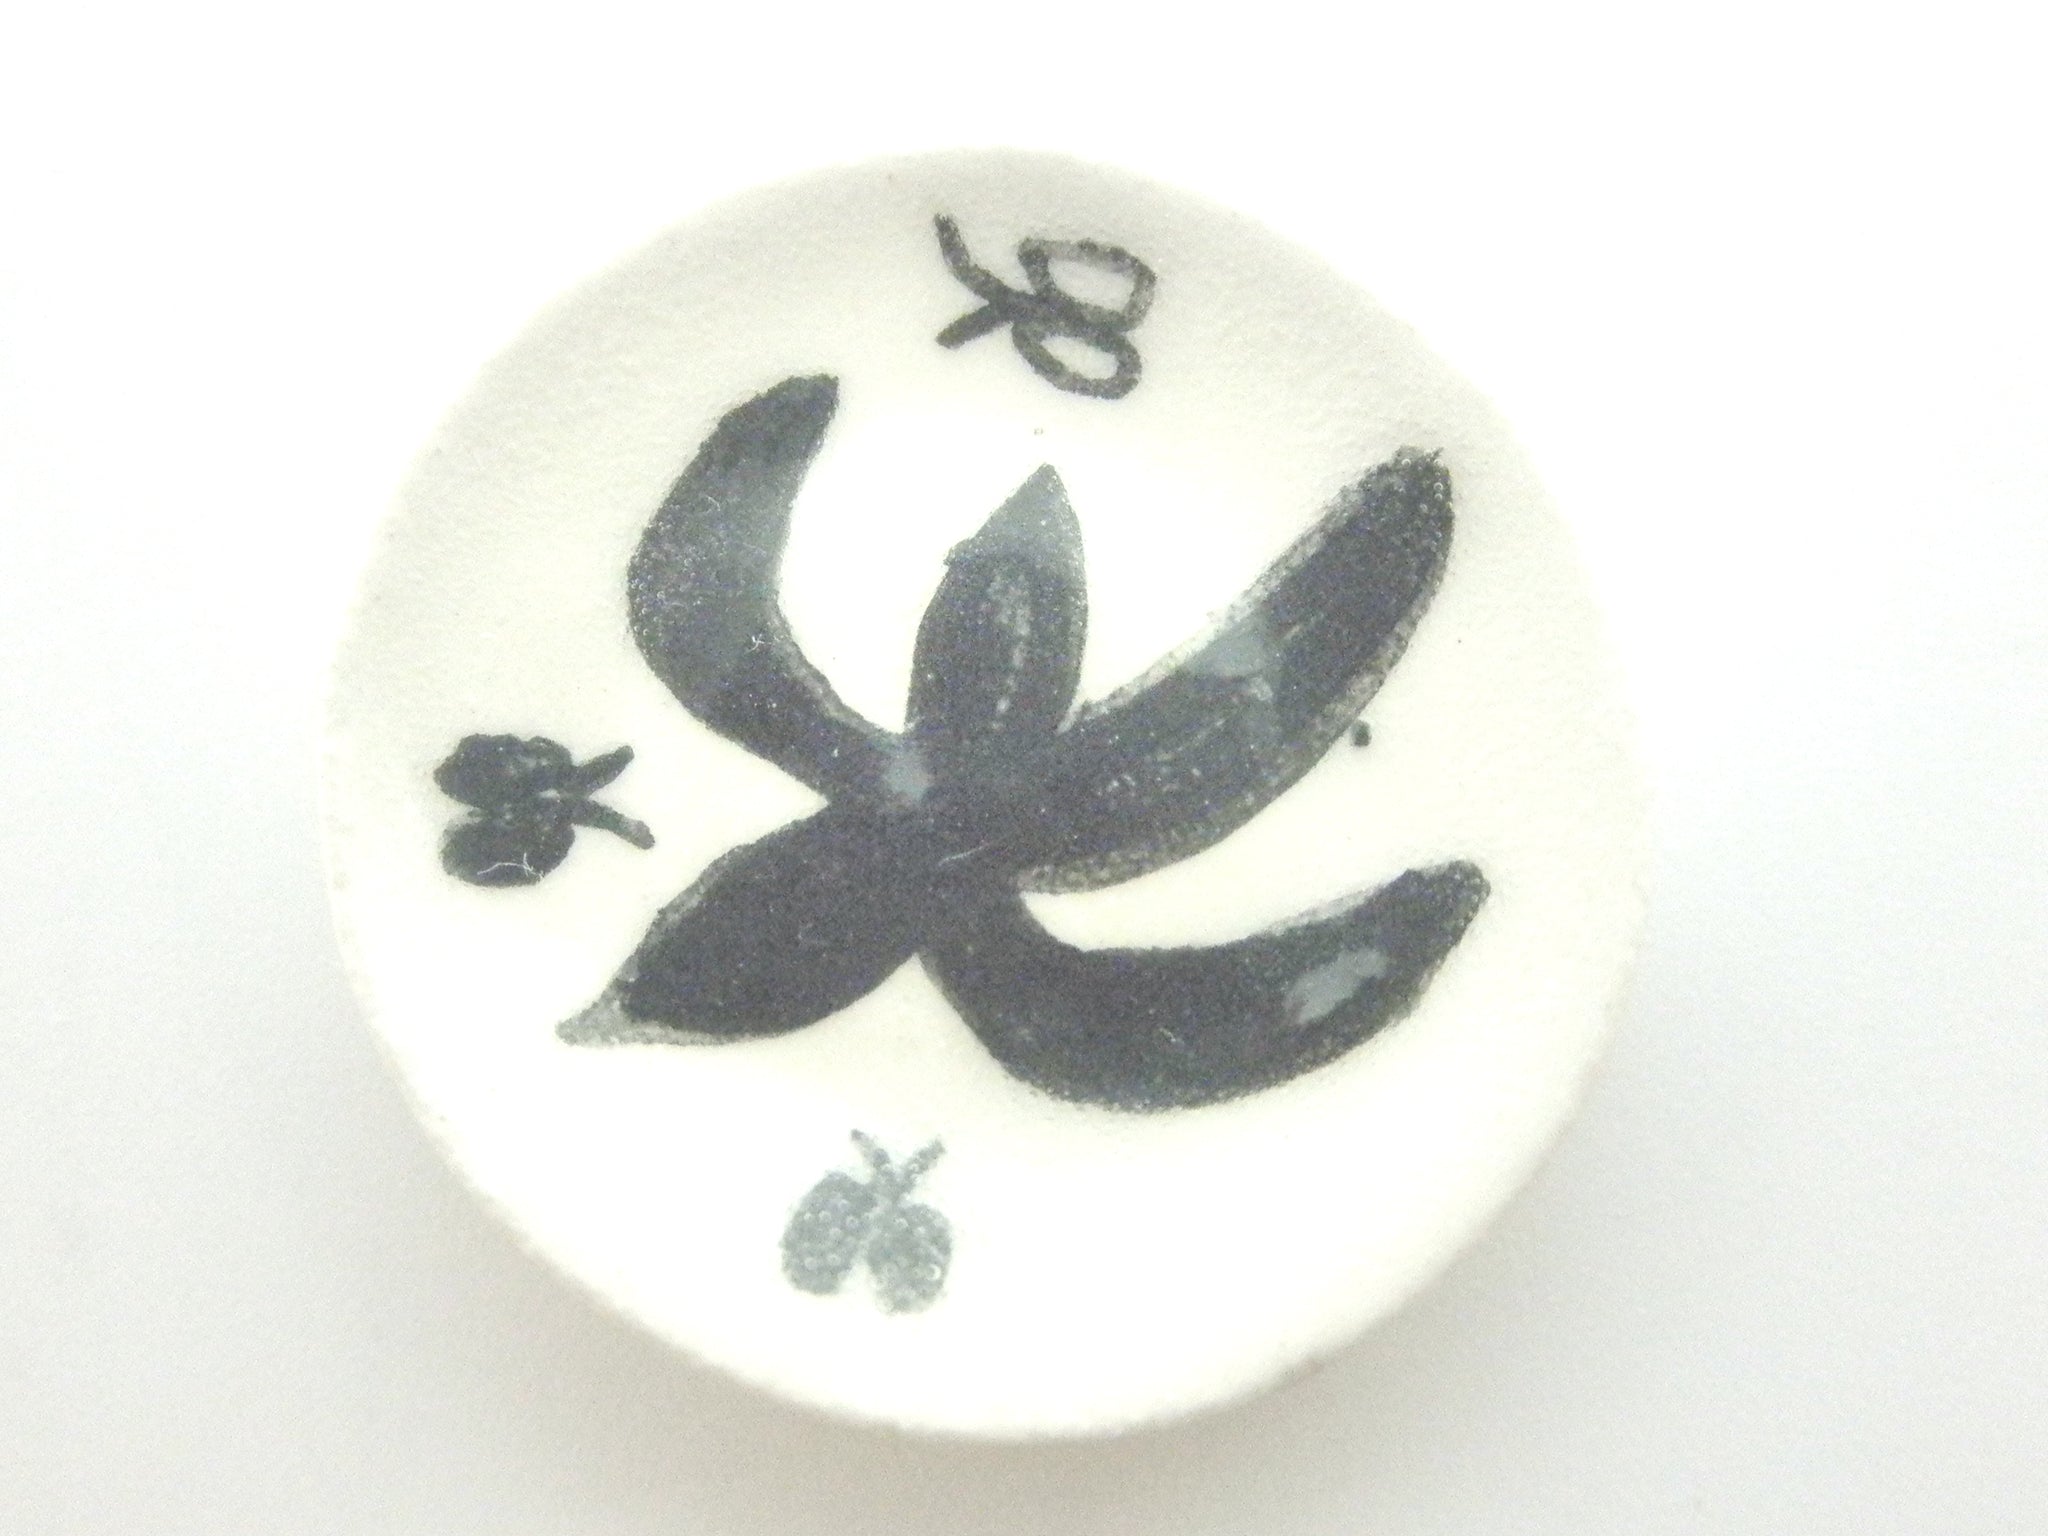 Miniature ceramic plate black and white with butterflies